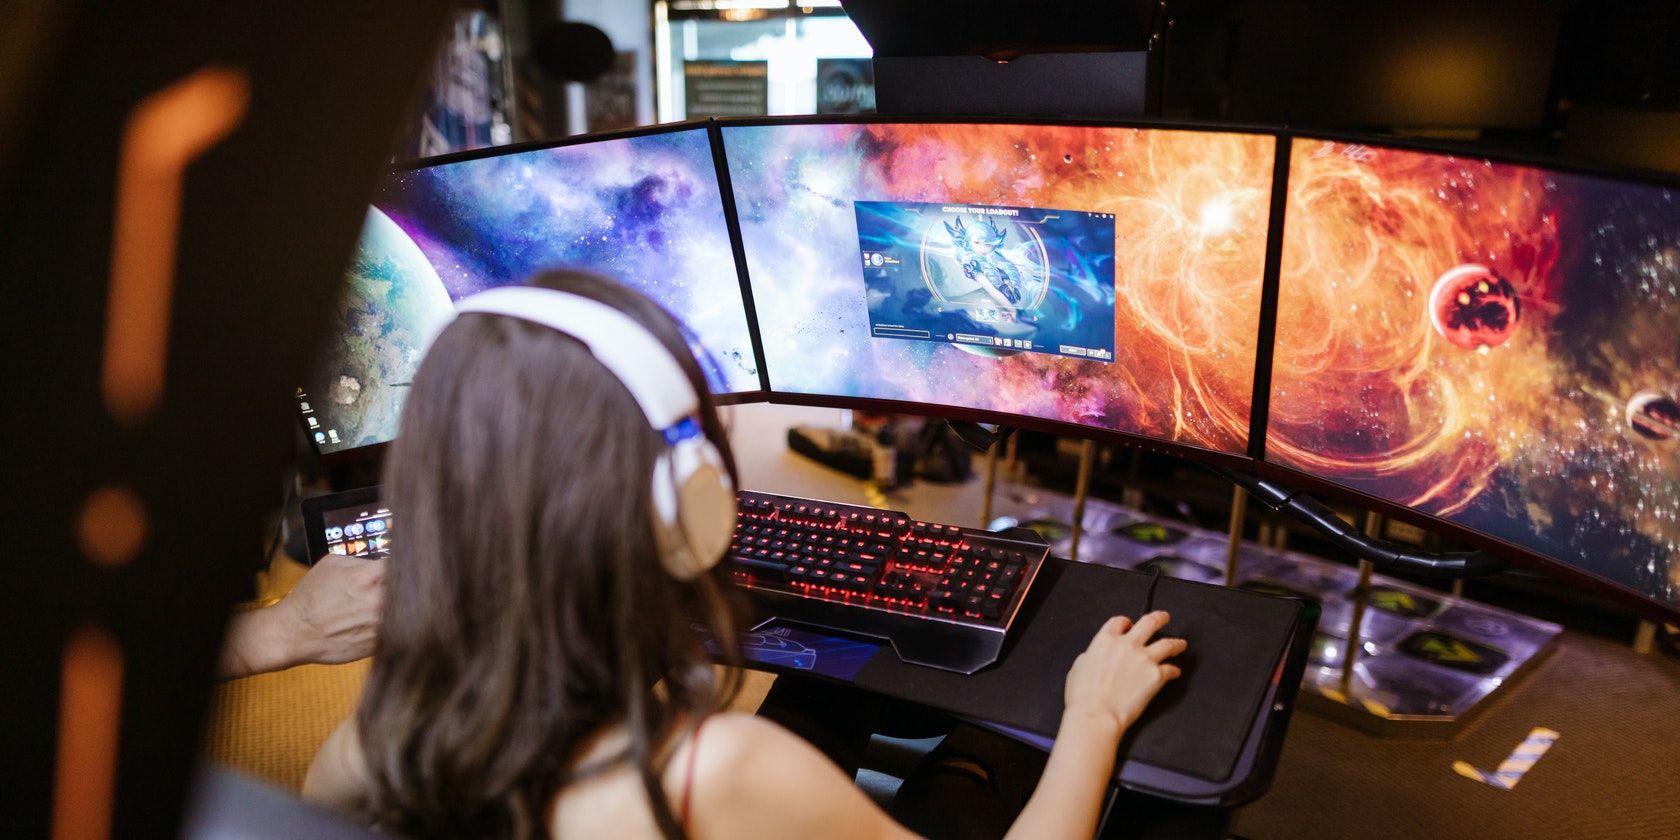 A woman with headphones on playing a video game in front of a desktop